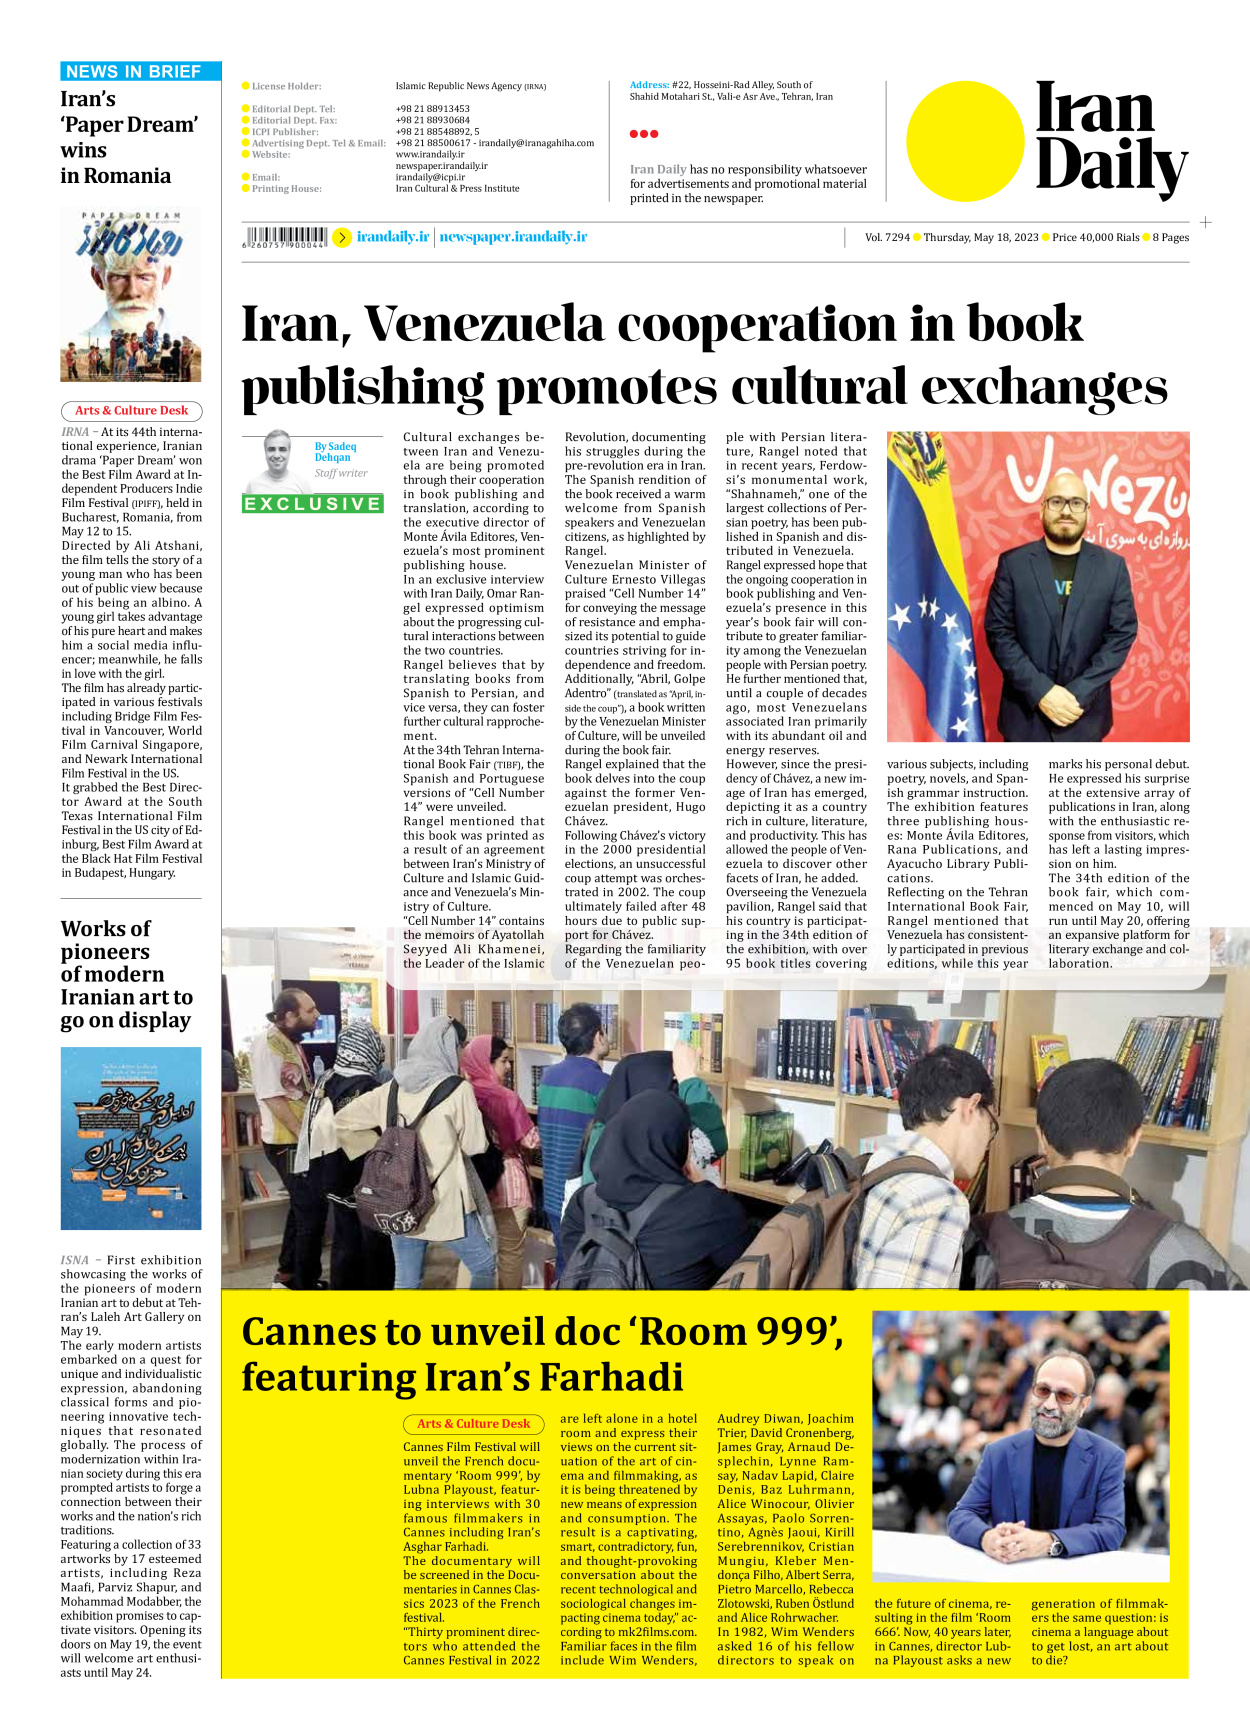 Iran Daily - Number Seven Thousand Two Hundred and Ninety Four - 18 May 2023 - Page 8